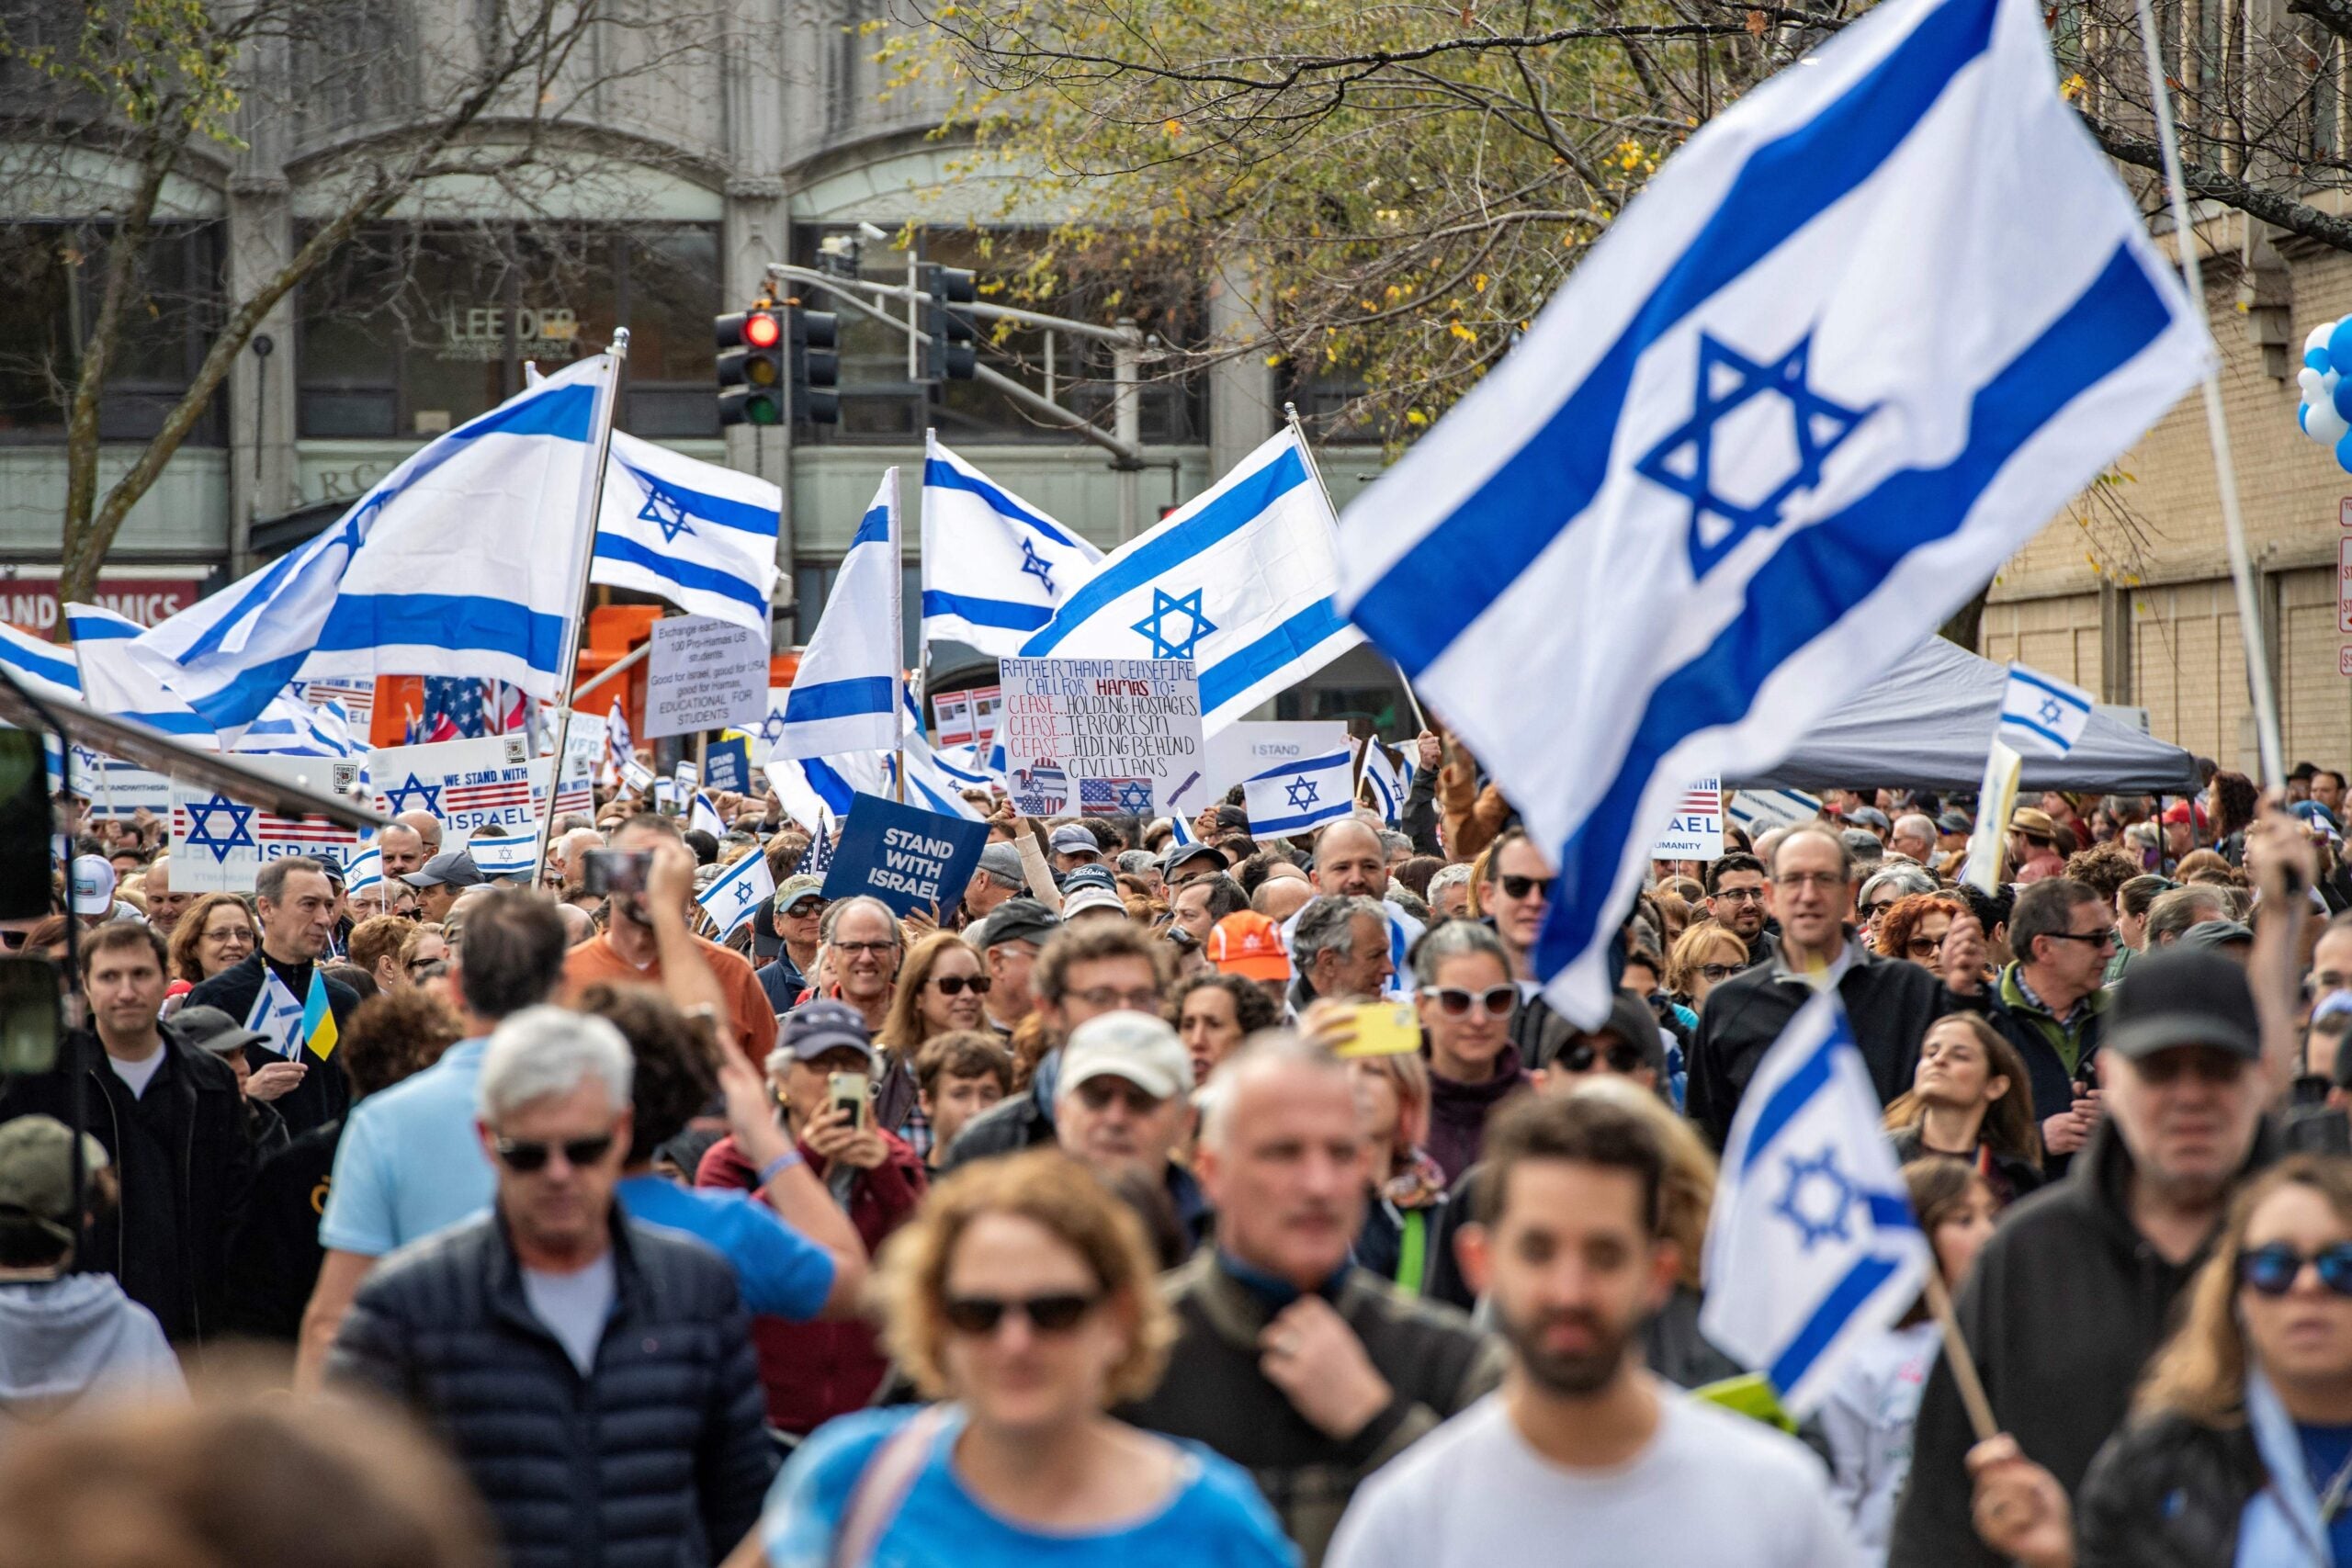 An unlikely Boston connection to Israel's flag - The Boston Globe